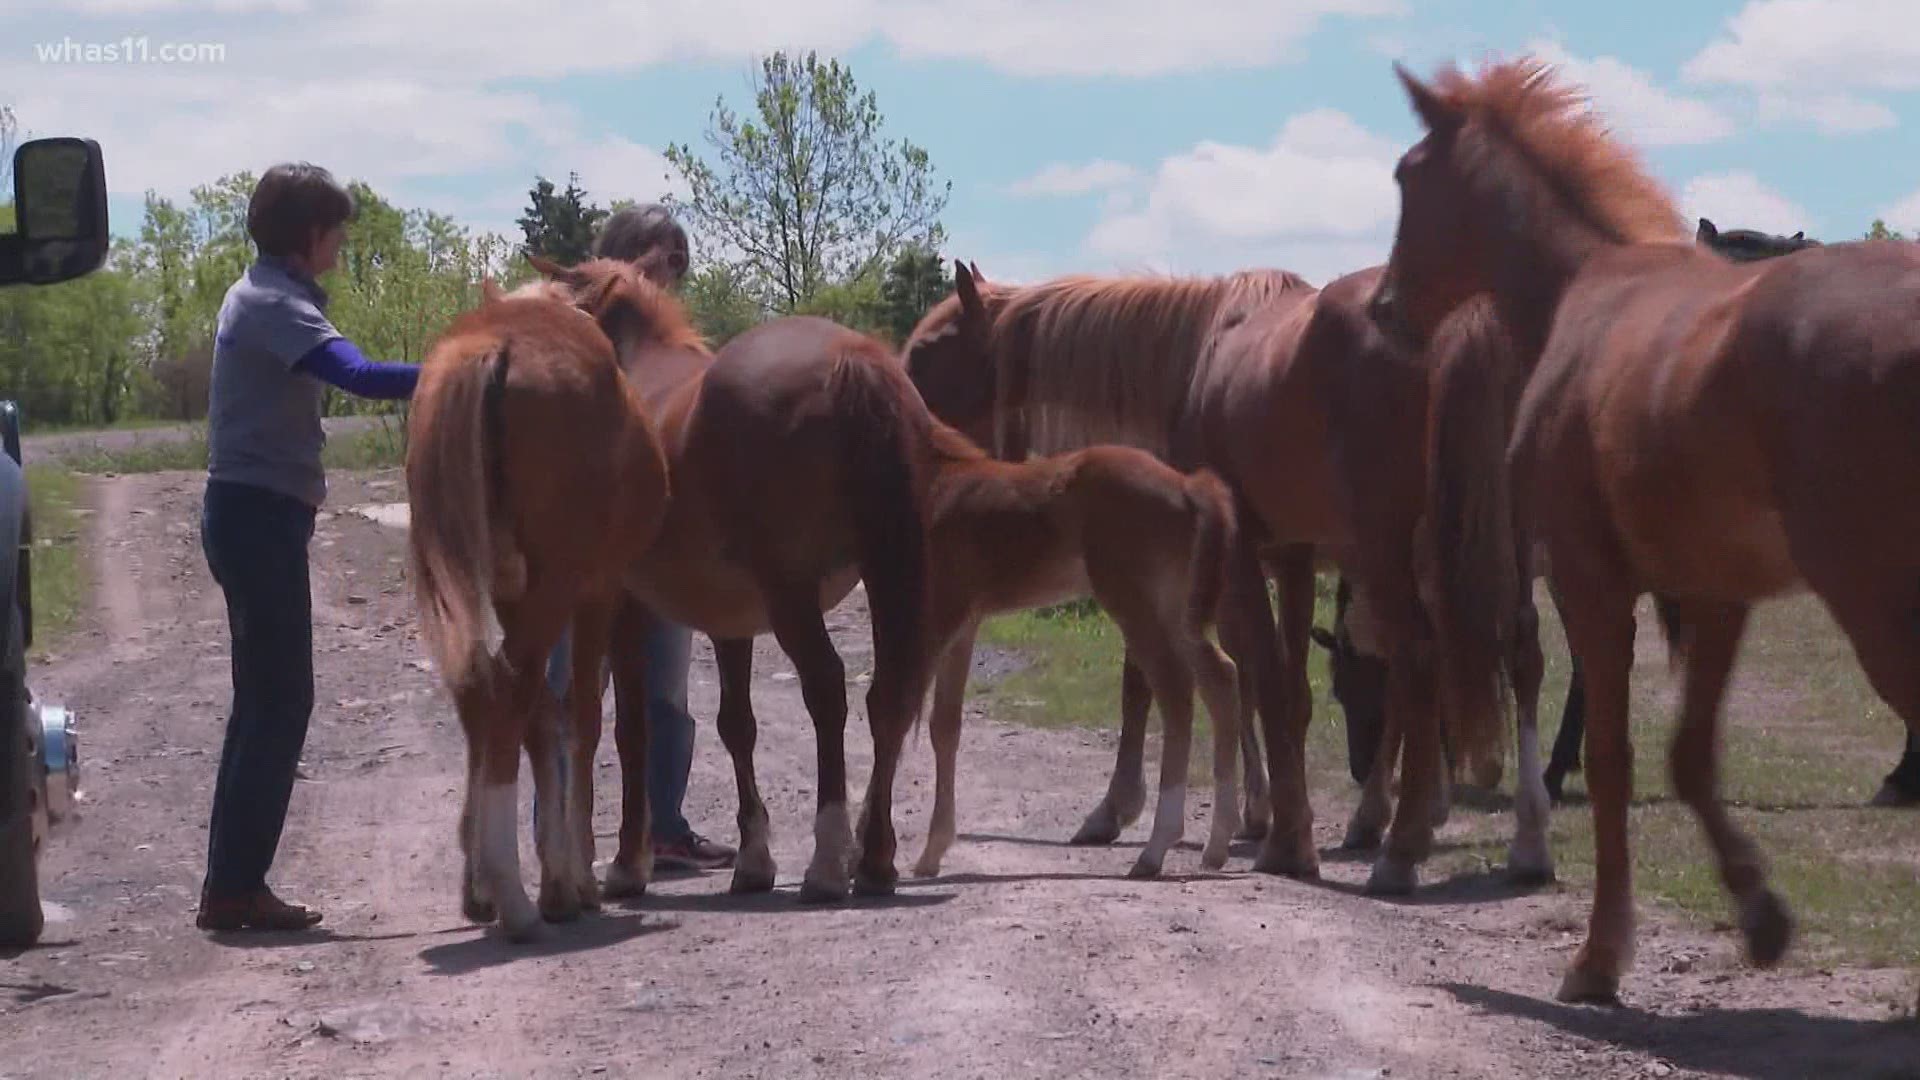 A group of volunteers are dedicating their time in protecting wild horses who roam the mountains of eastern Kentucky.